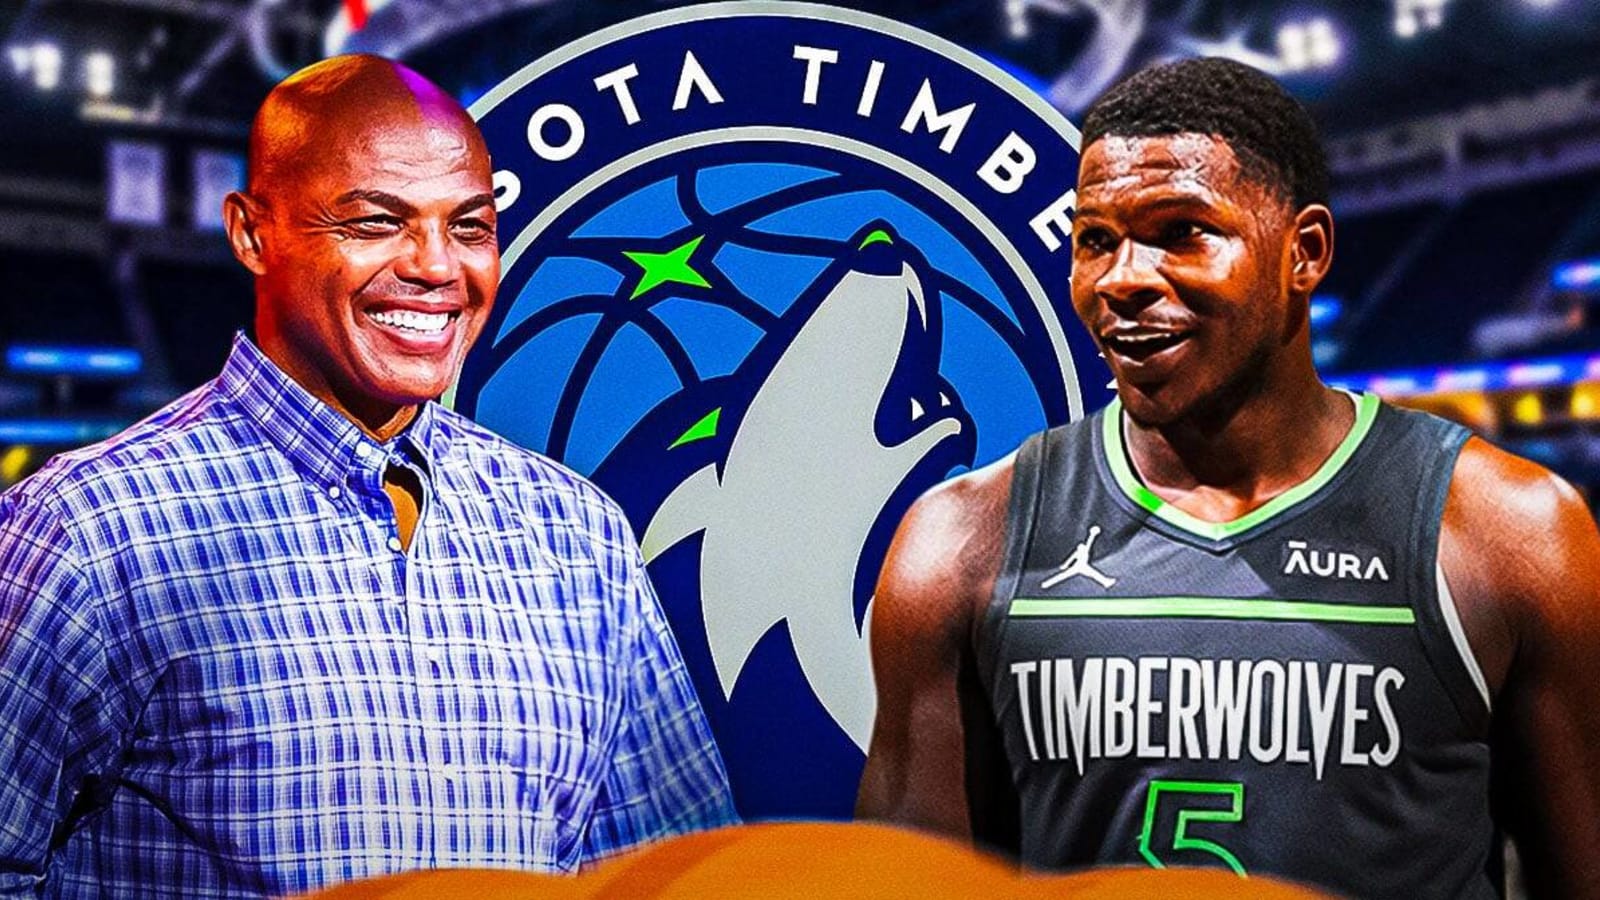 Timberwolves guard Anthony Edwards’ ‘bring ya a**’ quip to Charles Barkley used to help Minnesota tourism